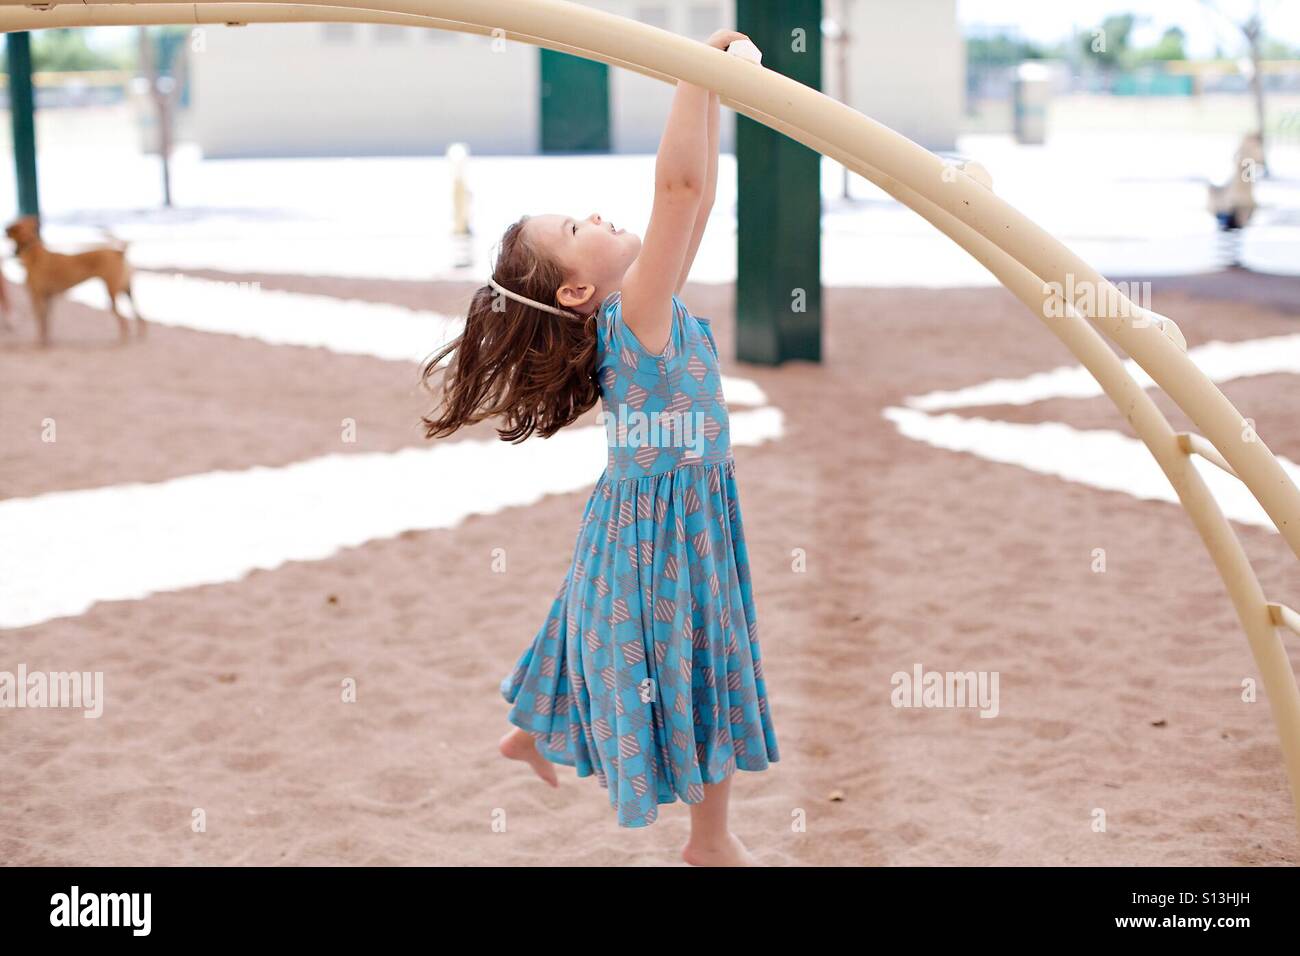 Girl hanging from monkey bars at park Banque D'Images